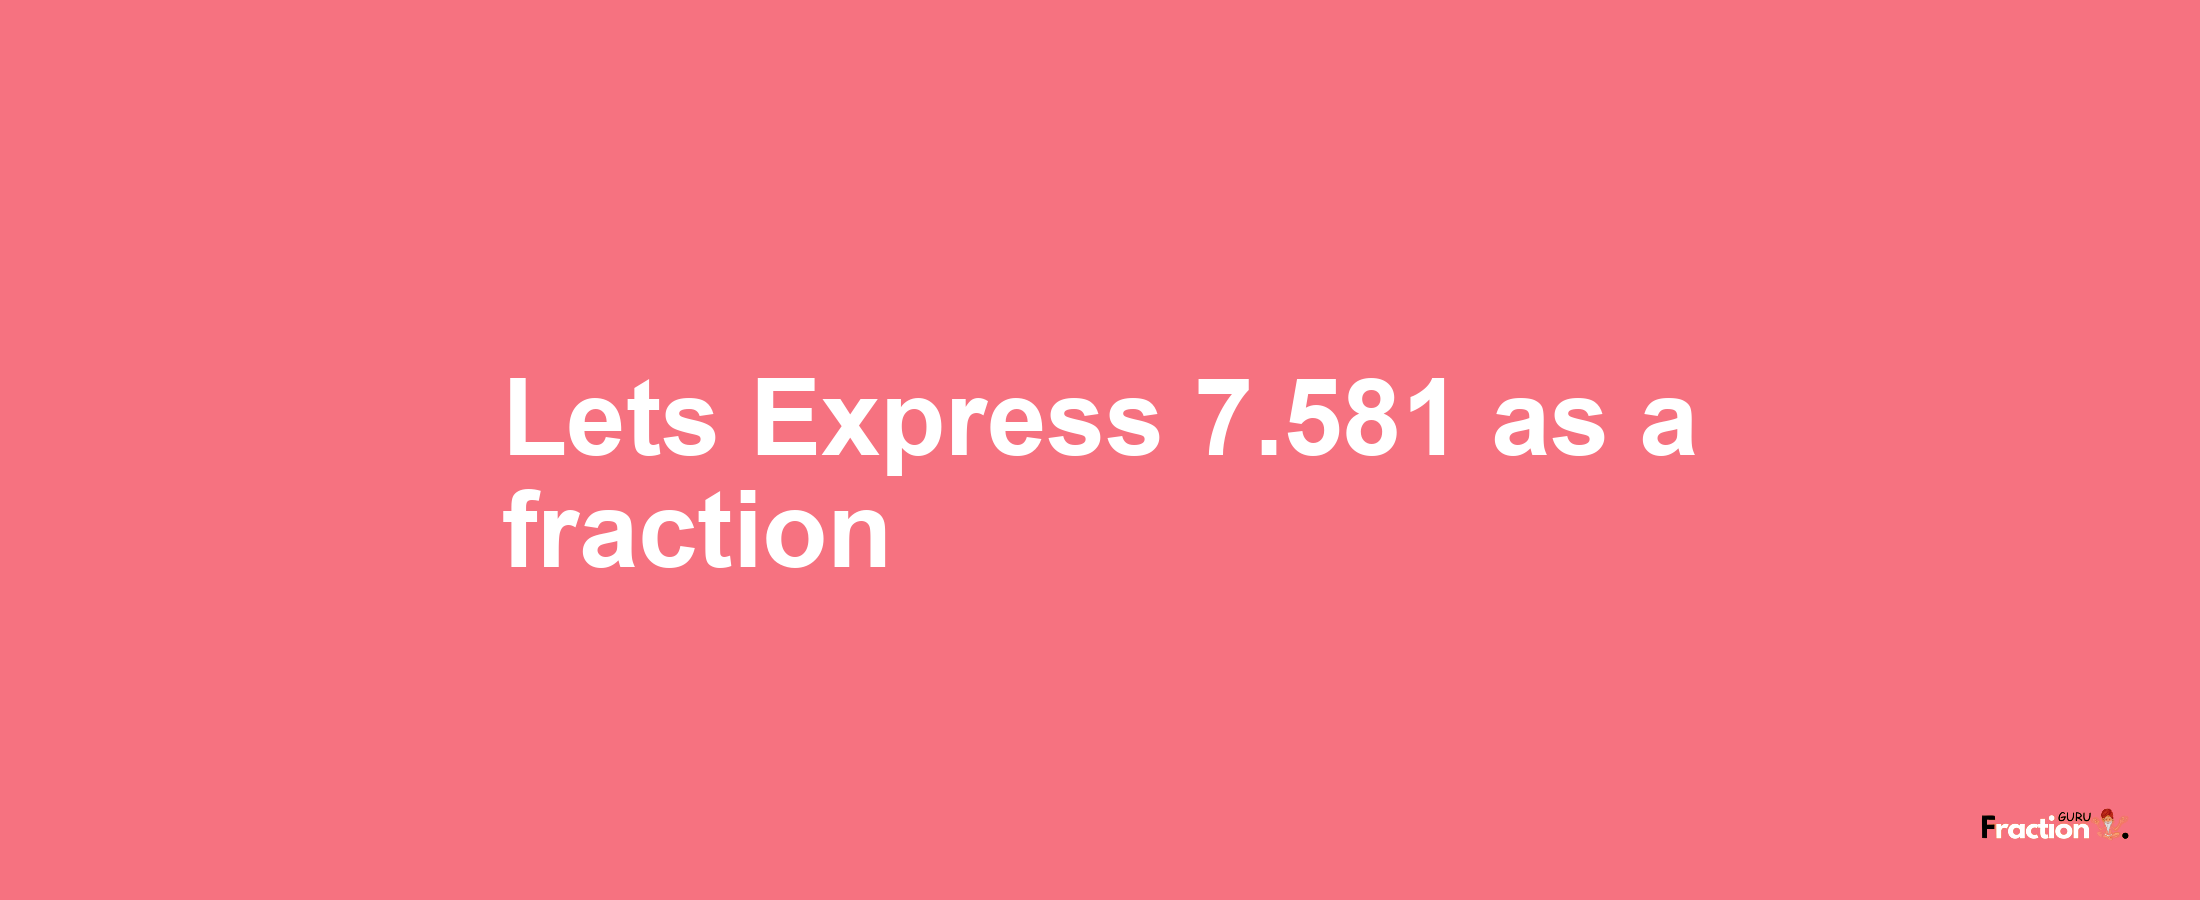 Lets Express 7.581 as afraction